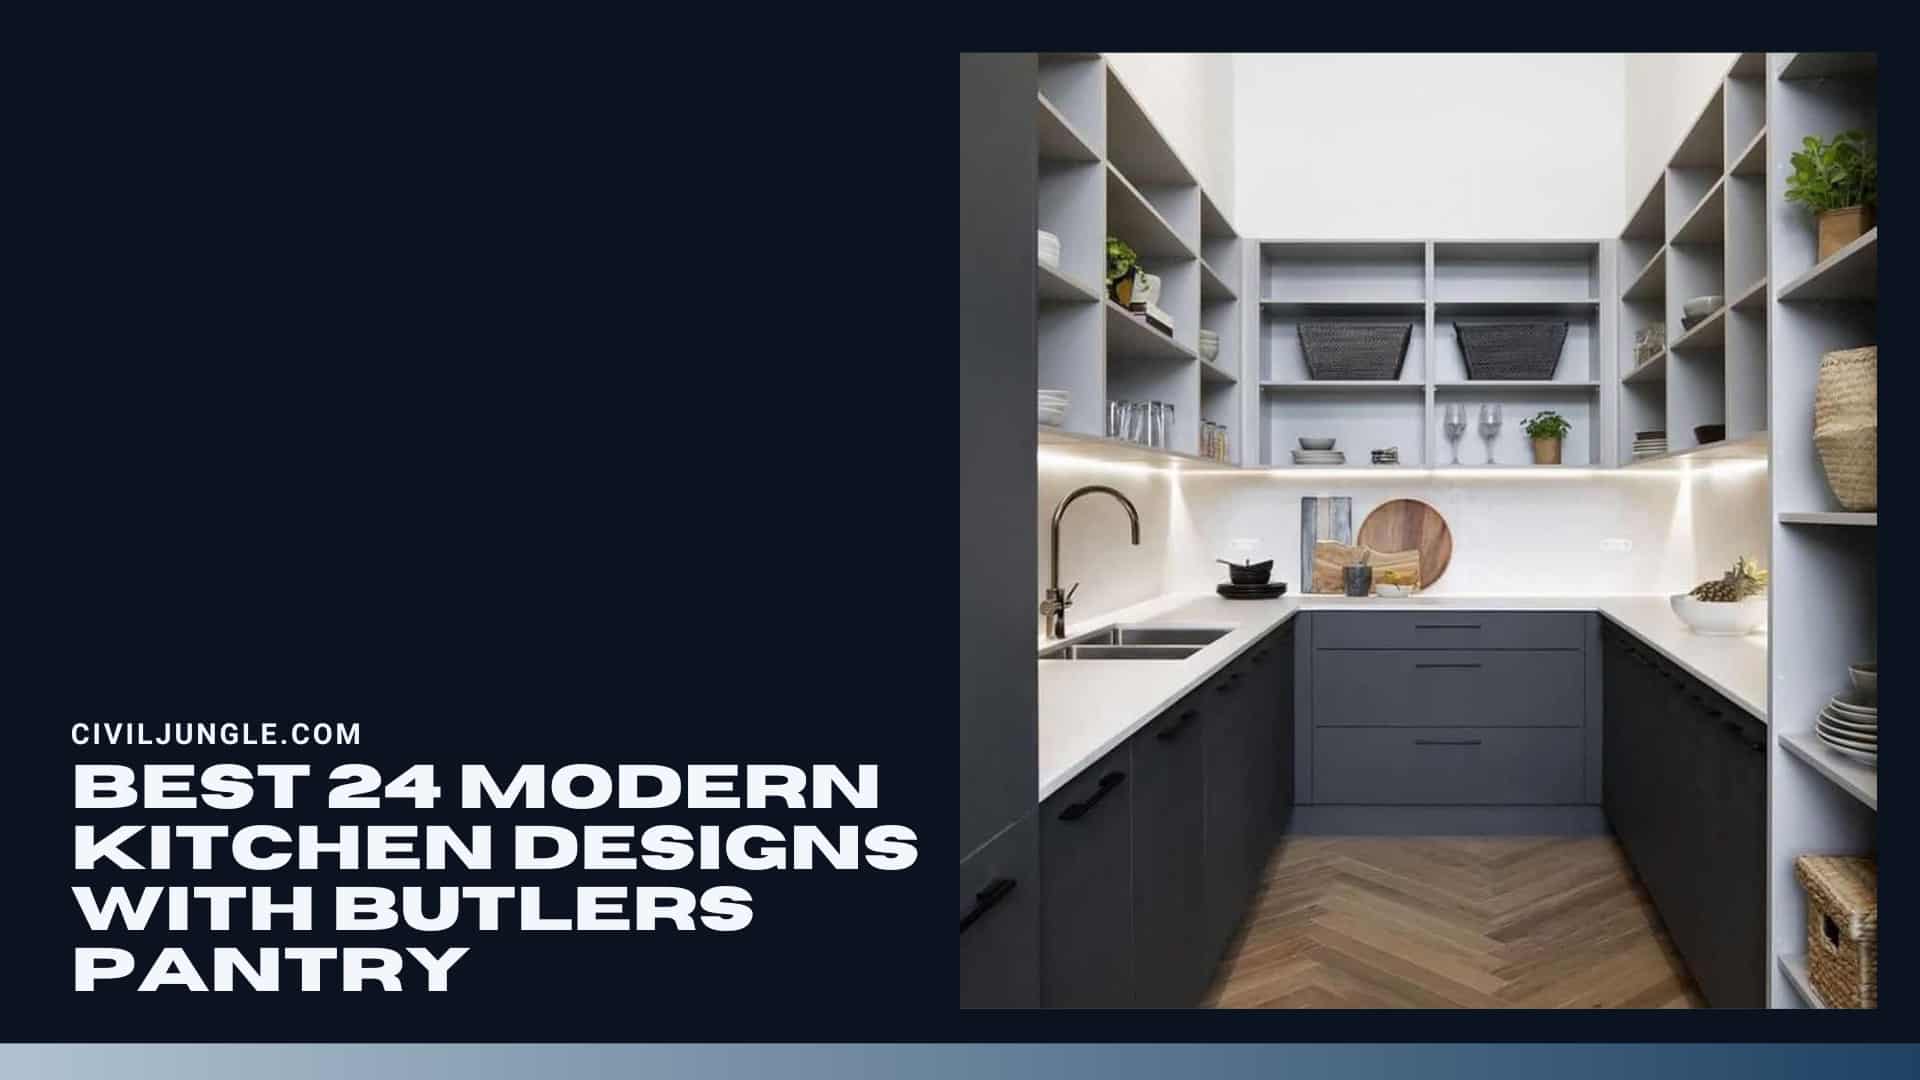 Best 24 Modern Kitchen Designs with Butlers Pantry